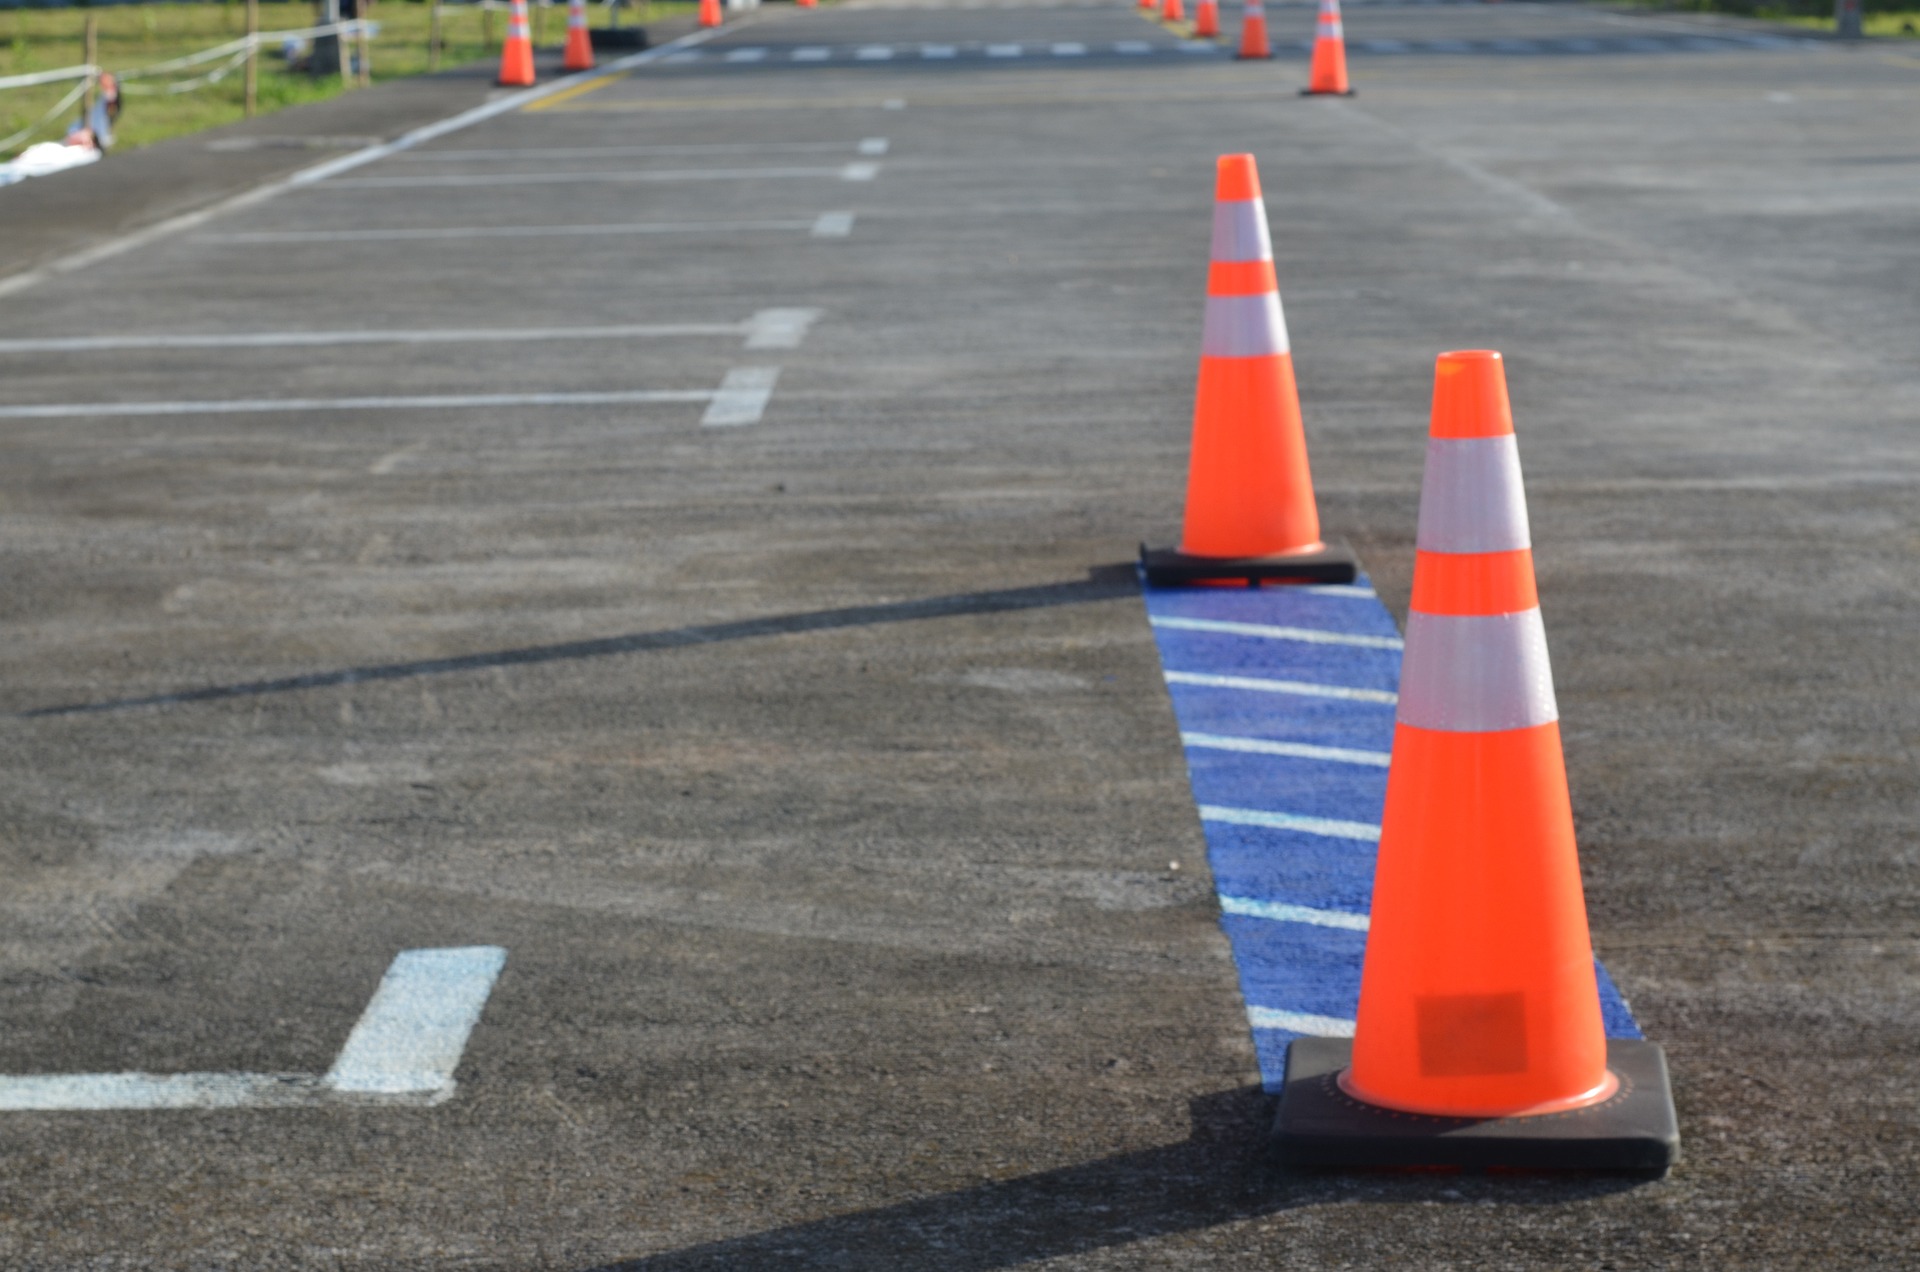 traffic cones set out for a driving test